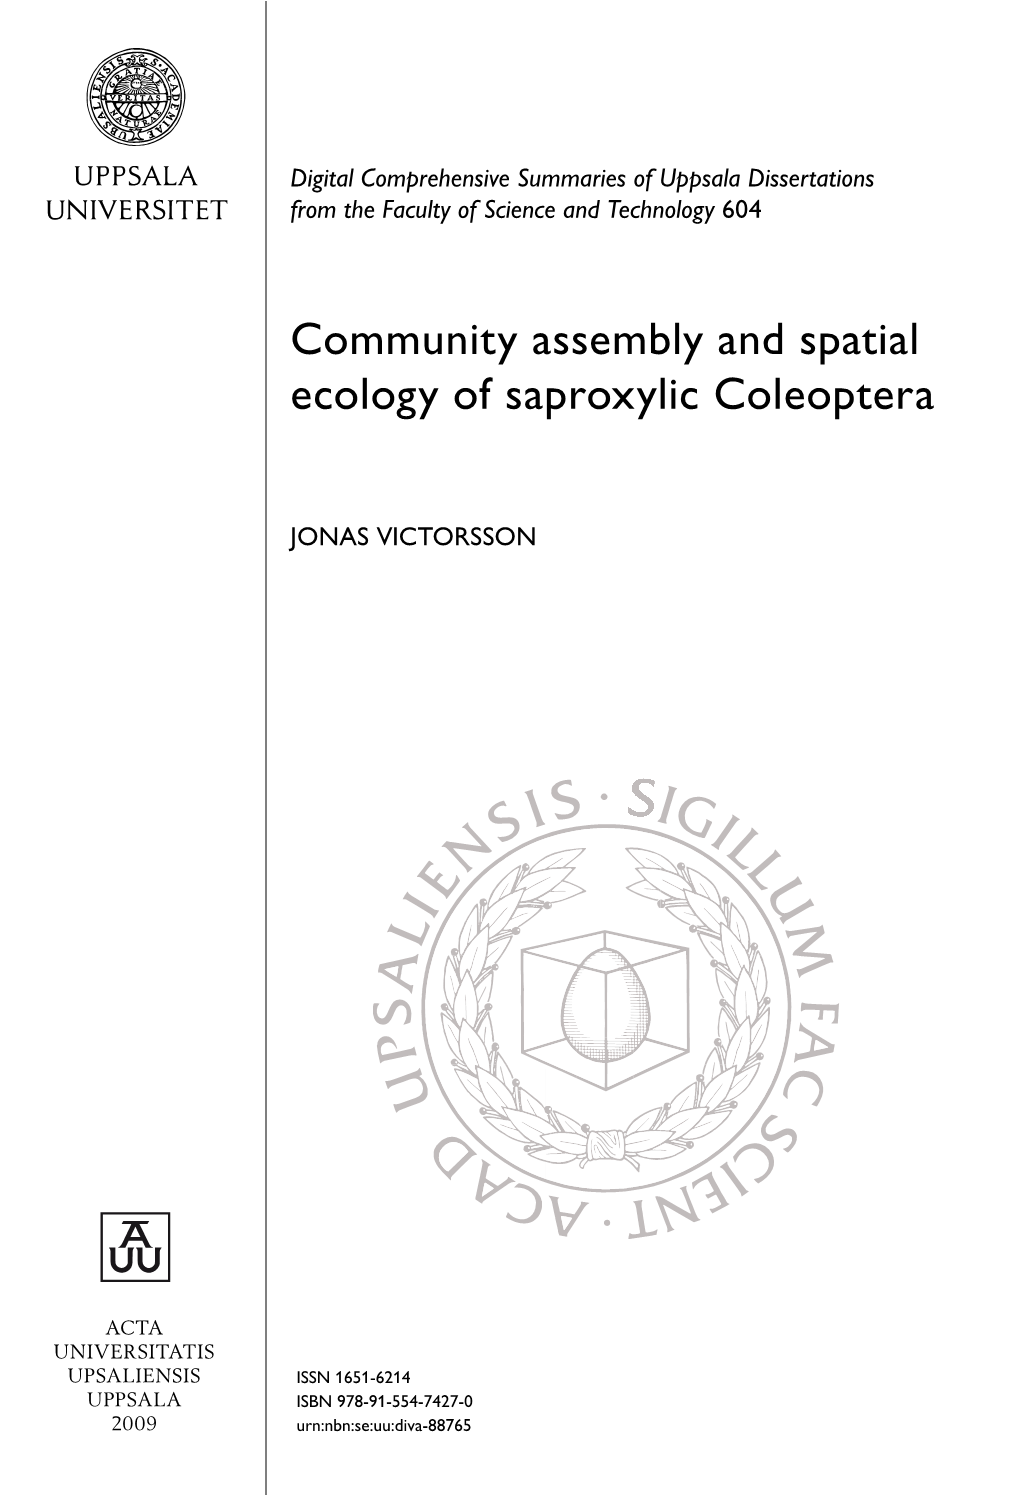 Community Assembly and Spatial Ecology of Saproxylic Coleoptera